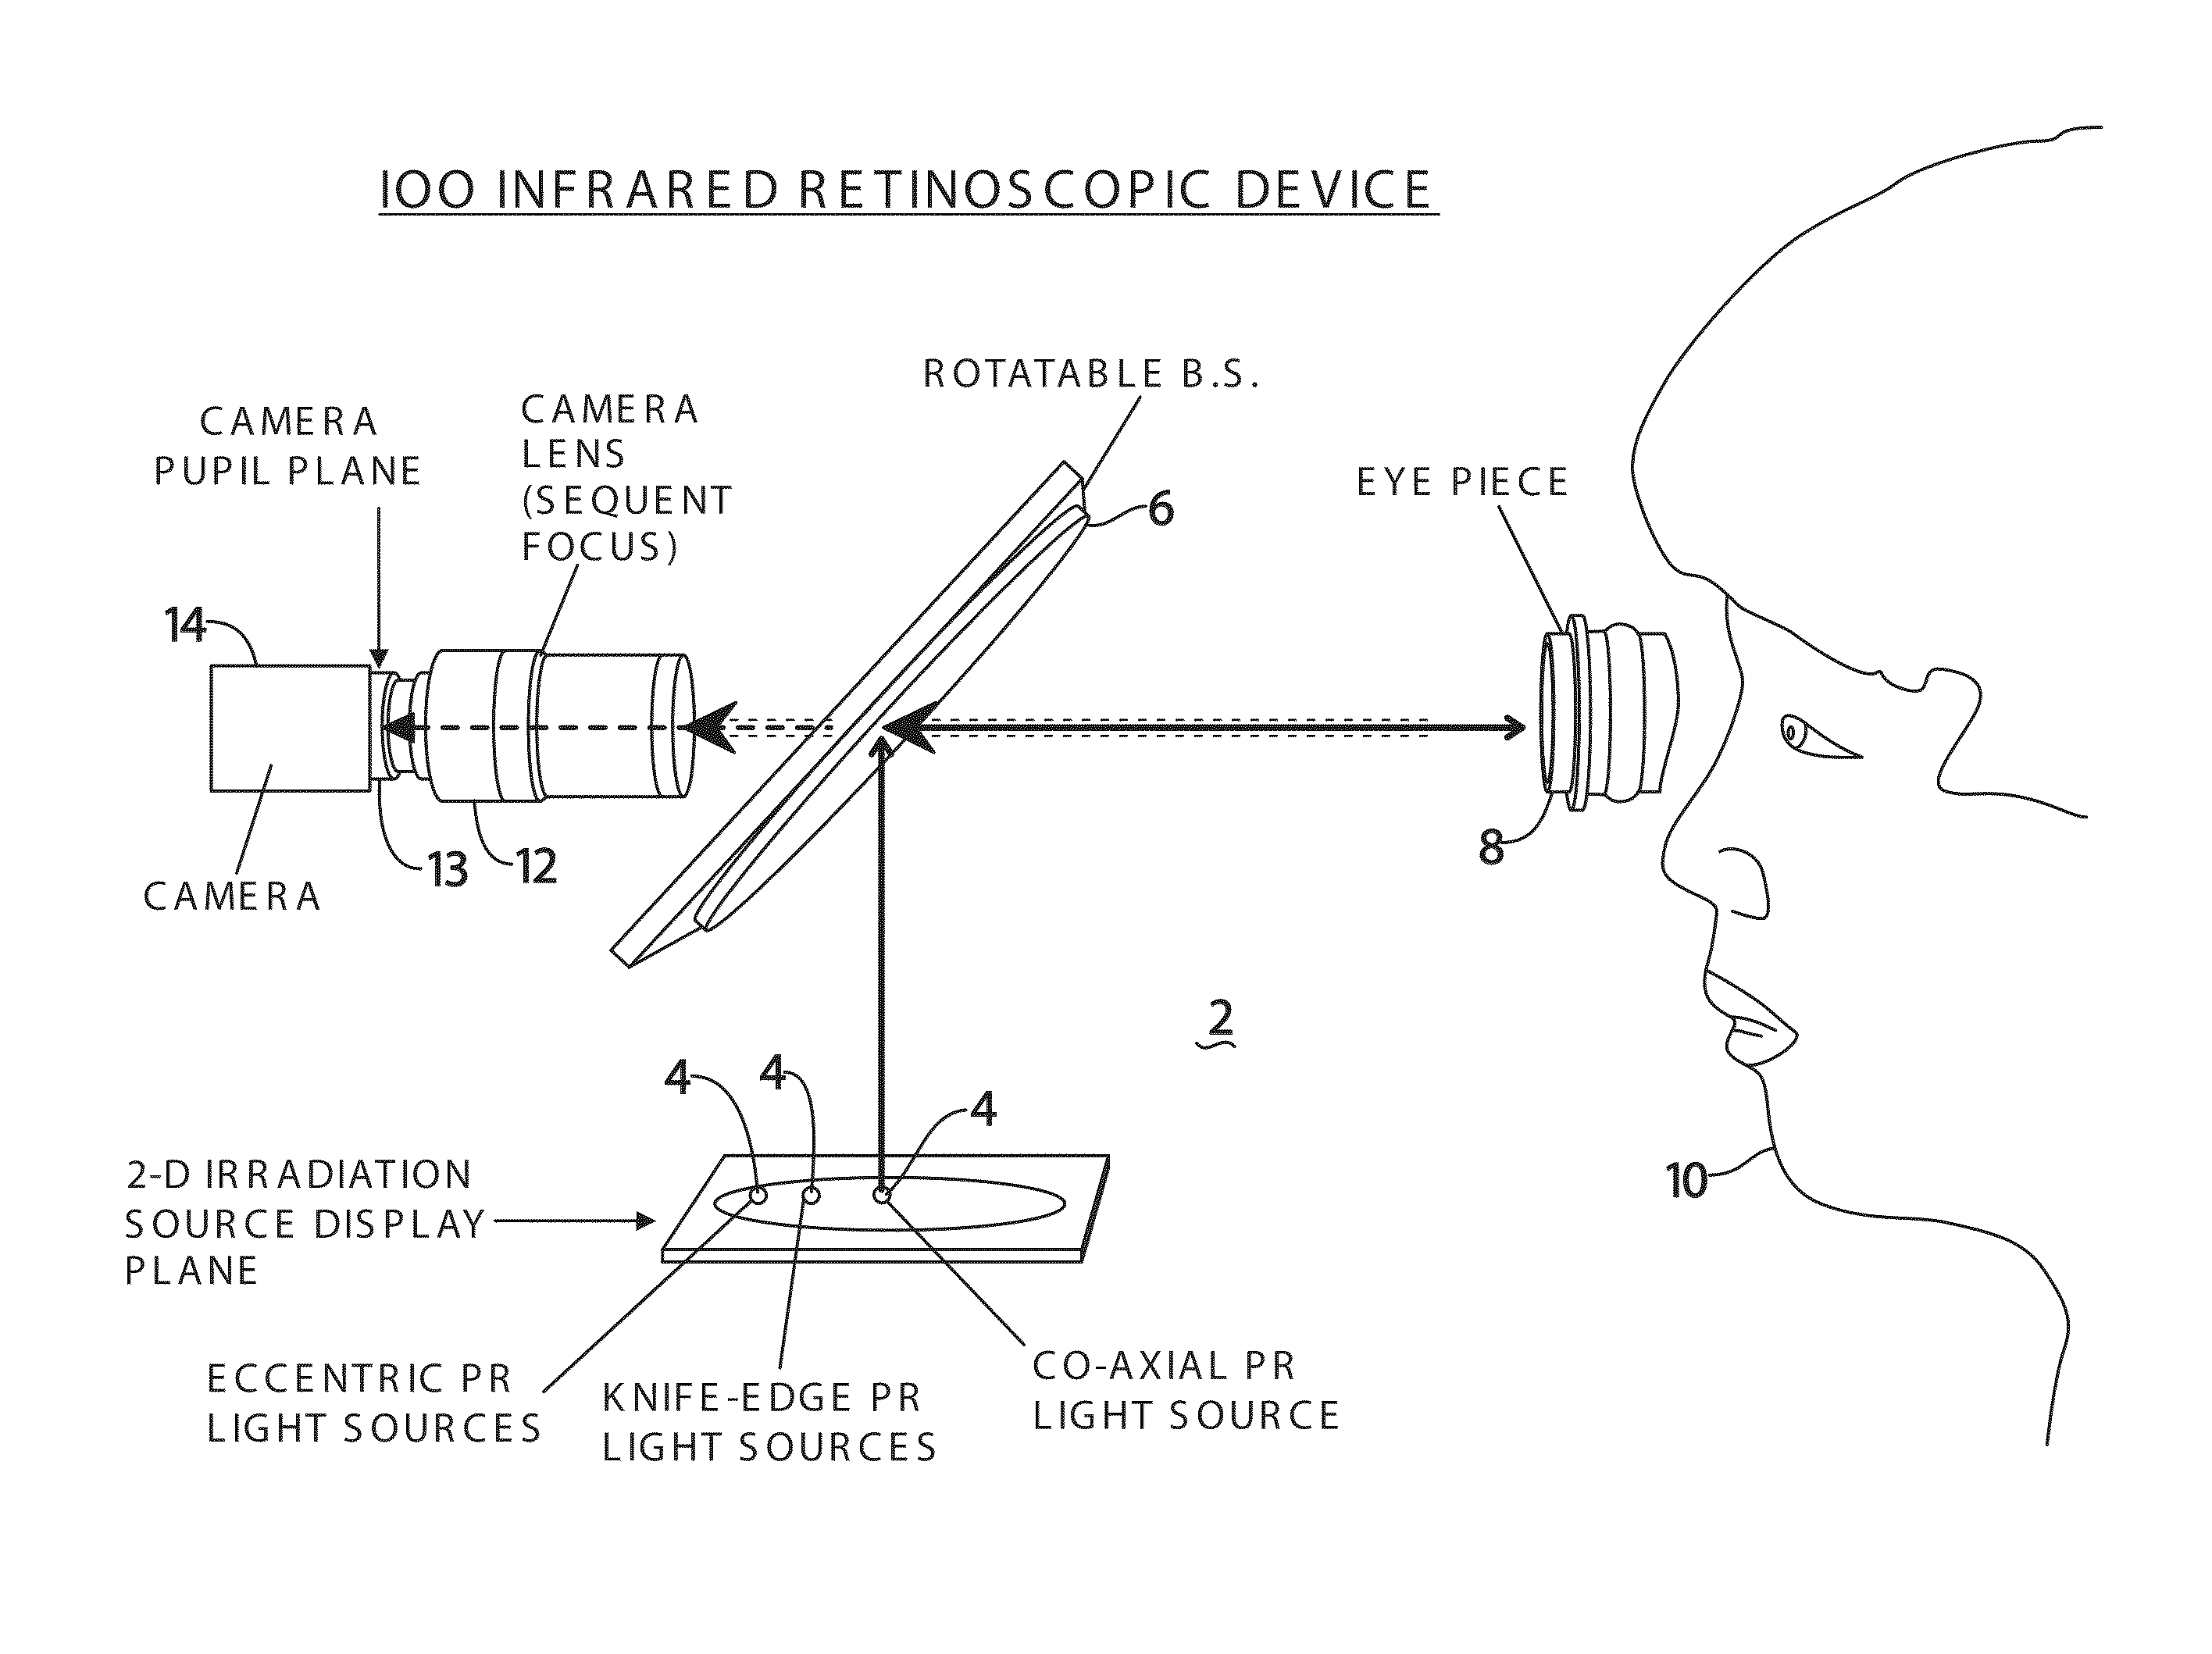 Adaptive infrared retinoscopic device for detecting ocular aberrations